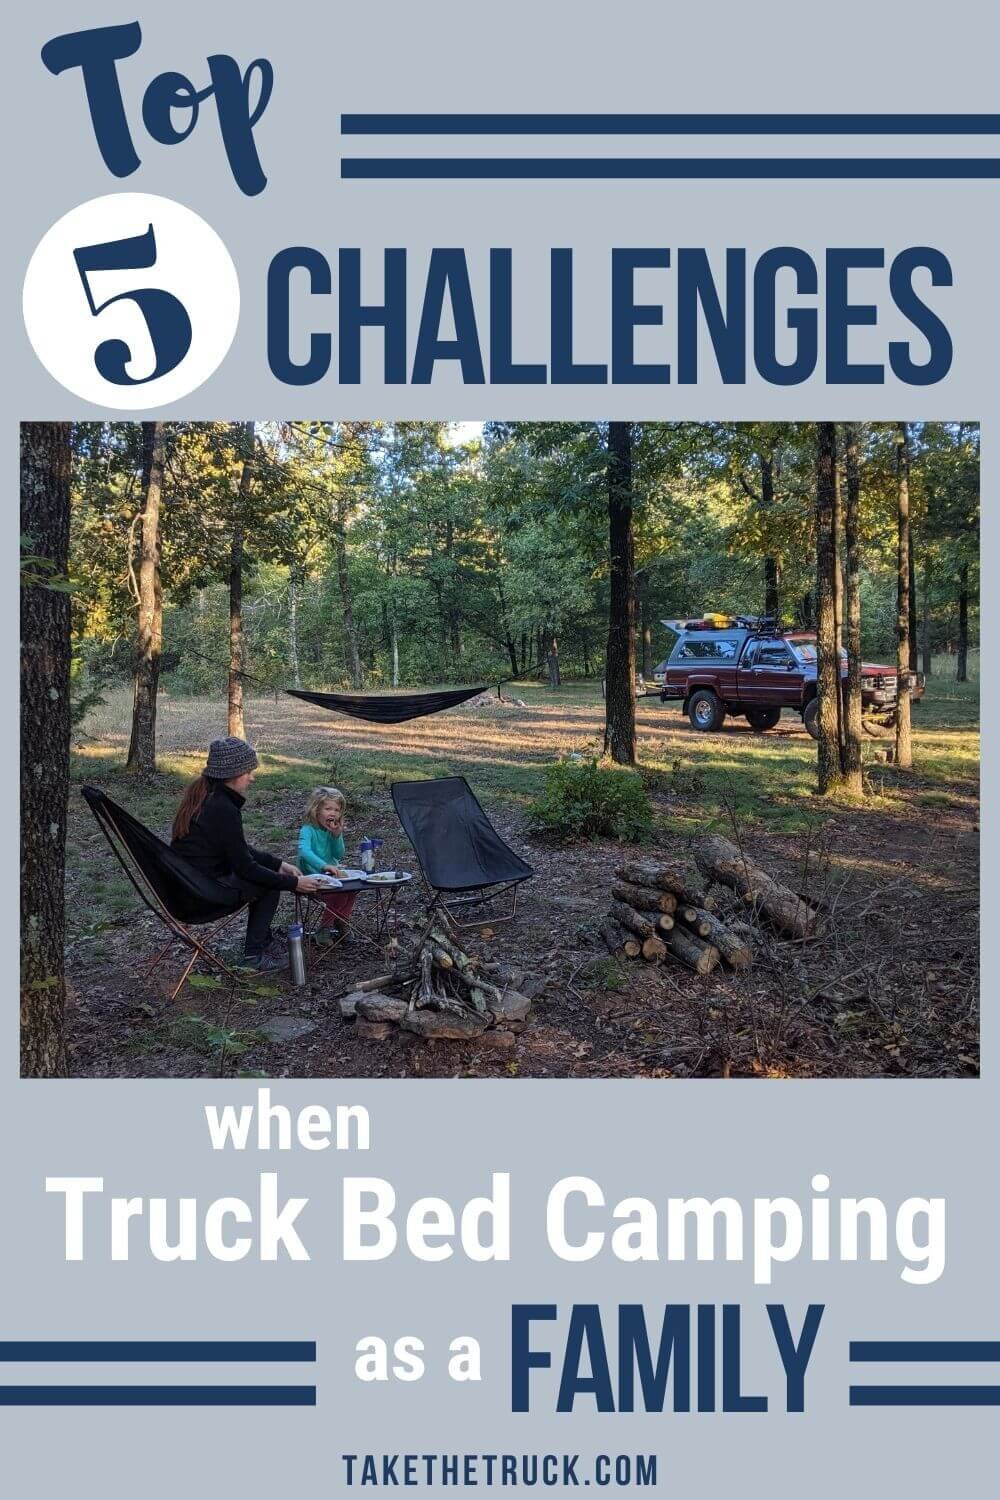 Truck bed camping as a family brings a lot of joys but also a lot of challenges! This post shares our top 5 struggles when truck camping as a family of 3.